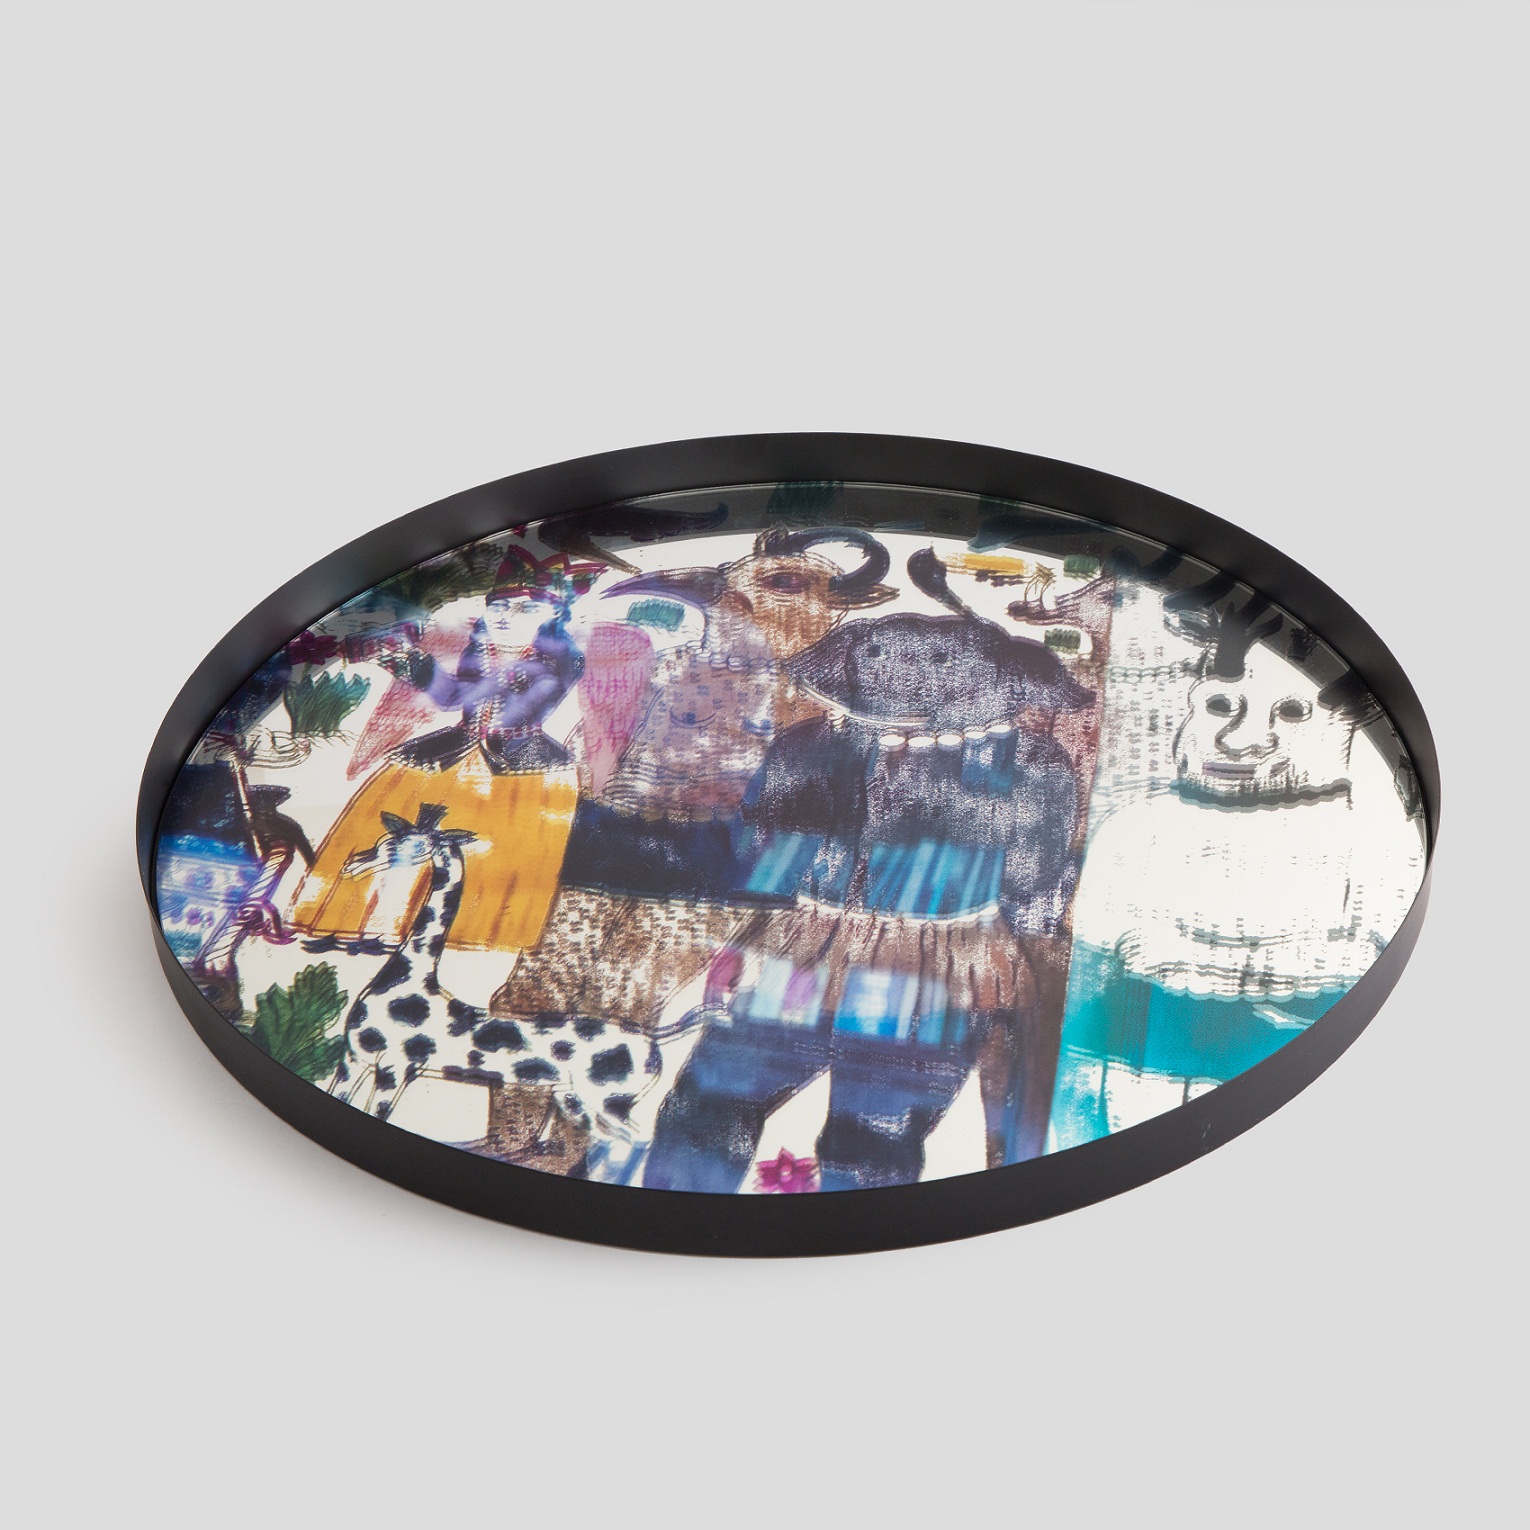 Picture of mirror tray with colorful pattern